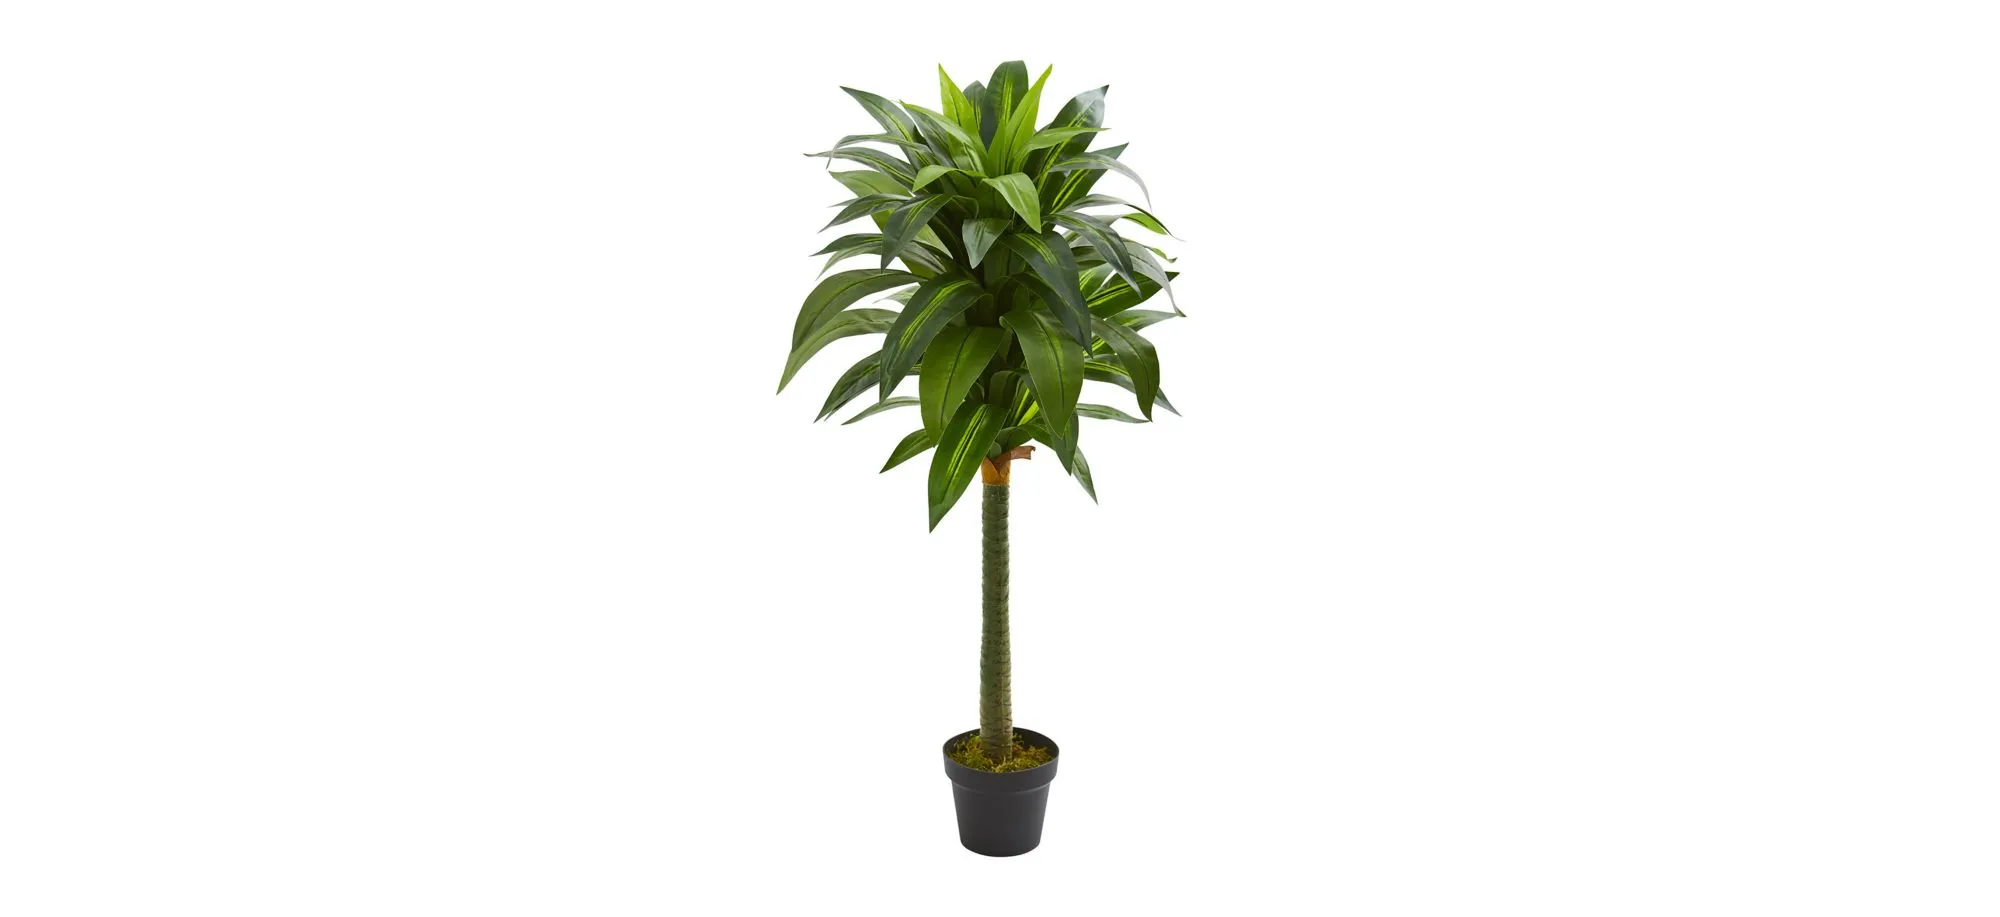 45in. Dracaena Artificial Plant in Green by Bellanest